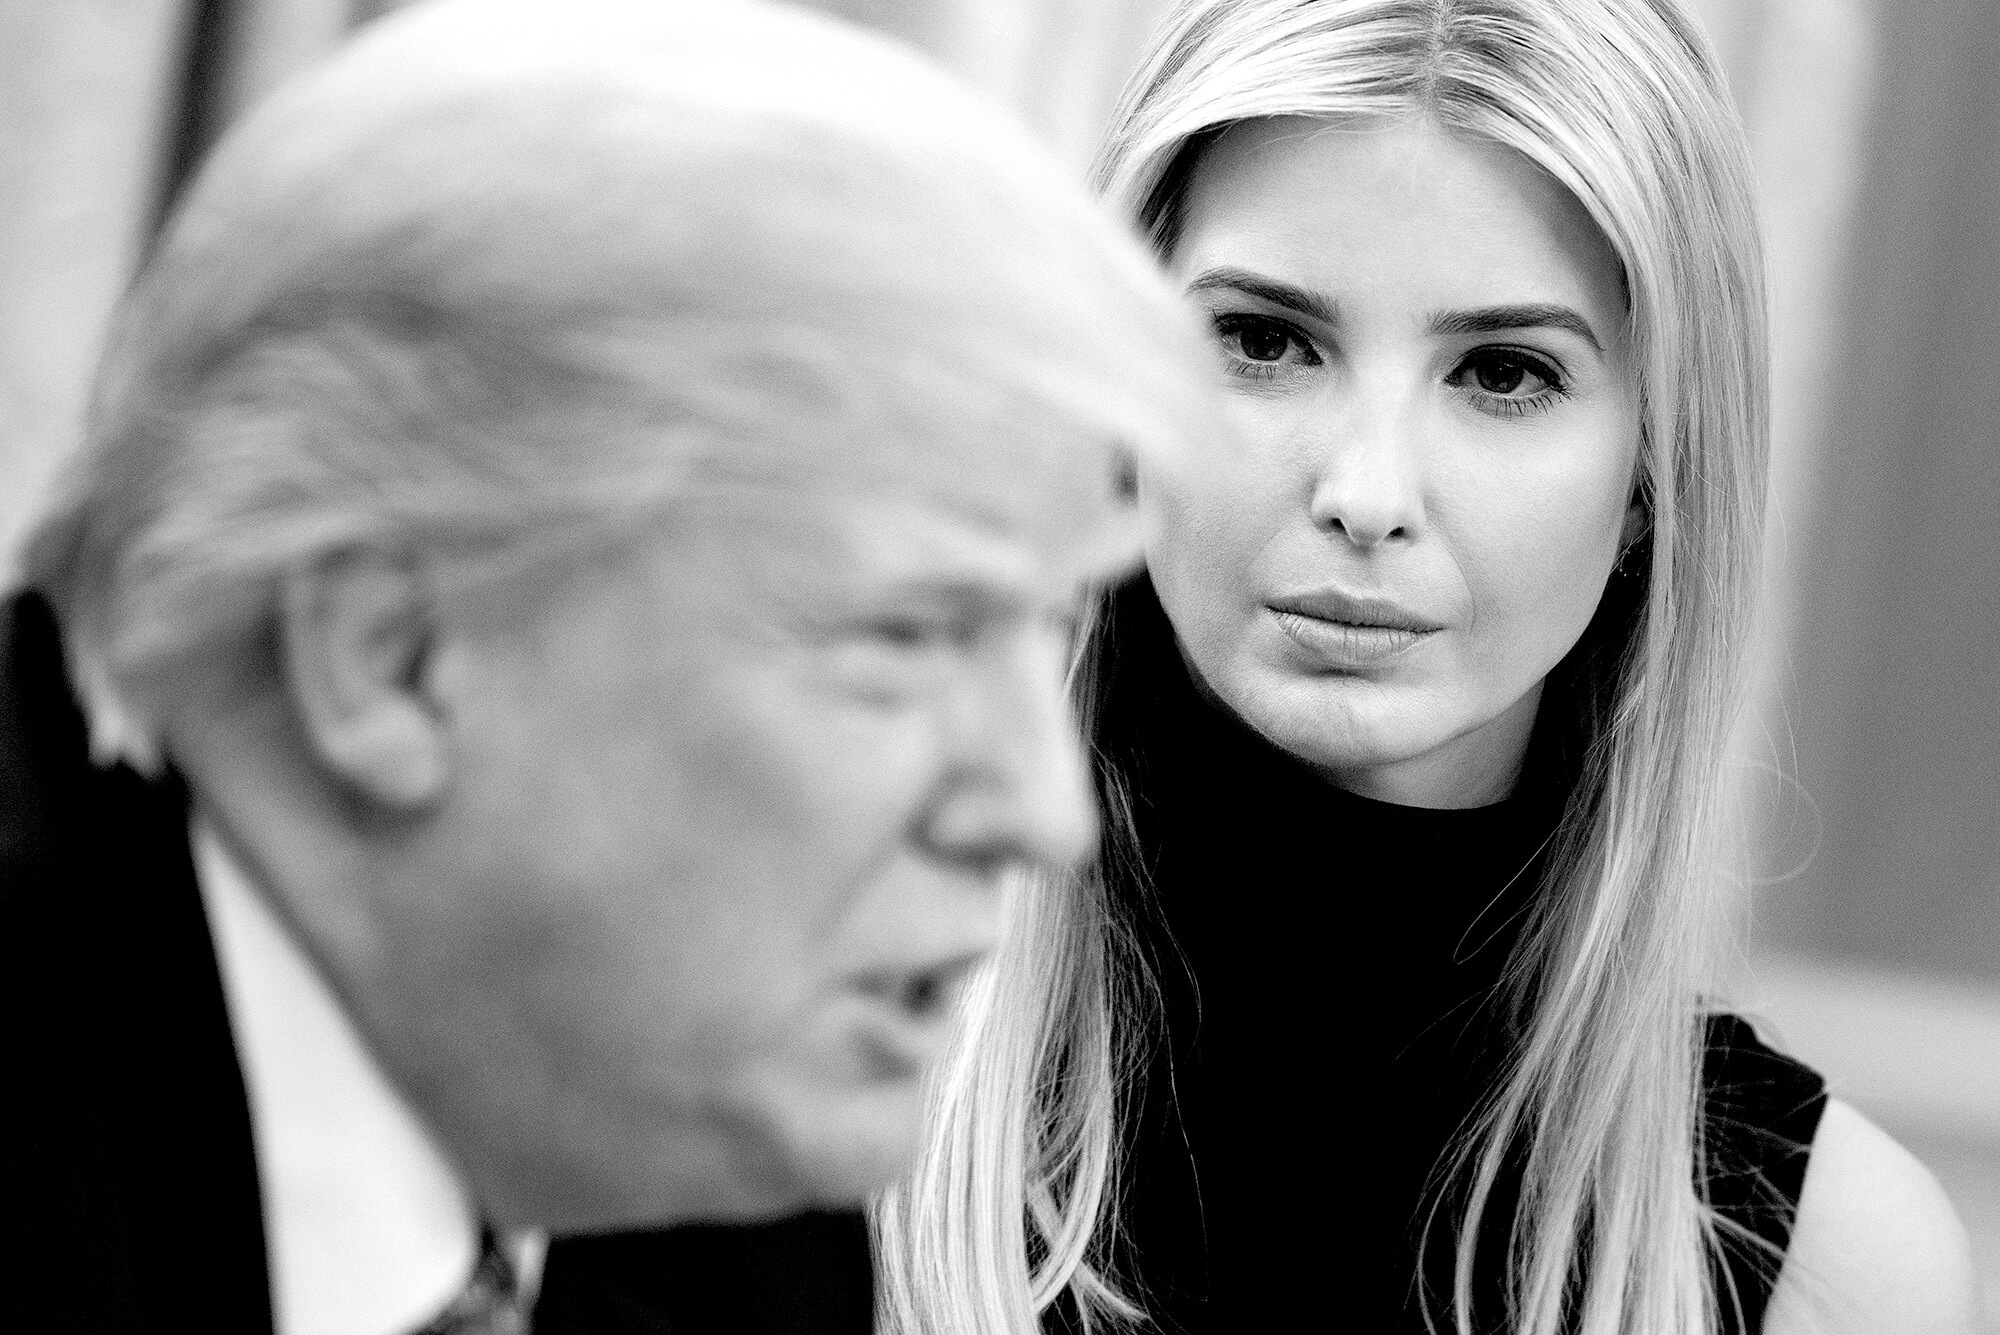 Donald Trump took nepotism to a new level, populating the White House with loyalists and family members unqualified for their roles, including his daughter Ivanka Trump and his son-in-law Jared Kushner.